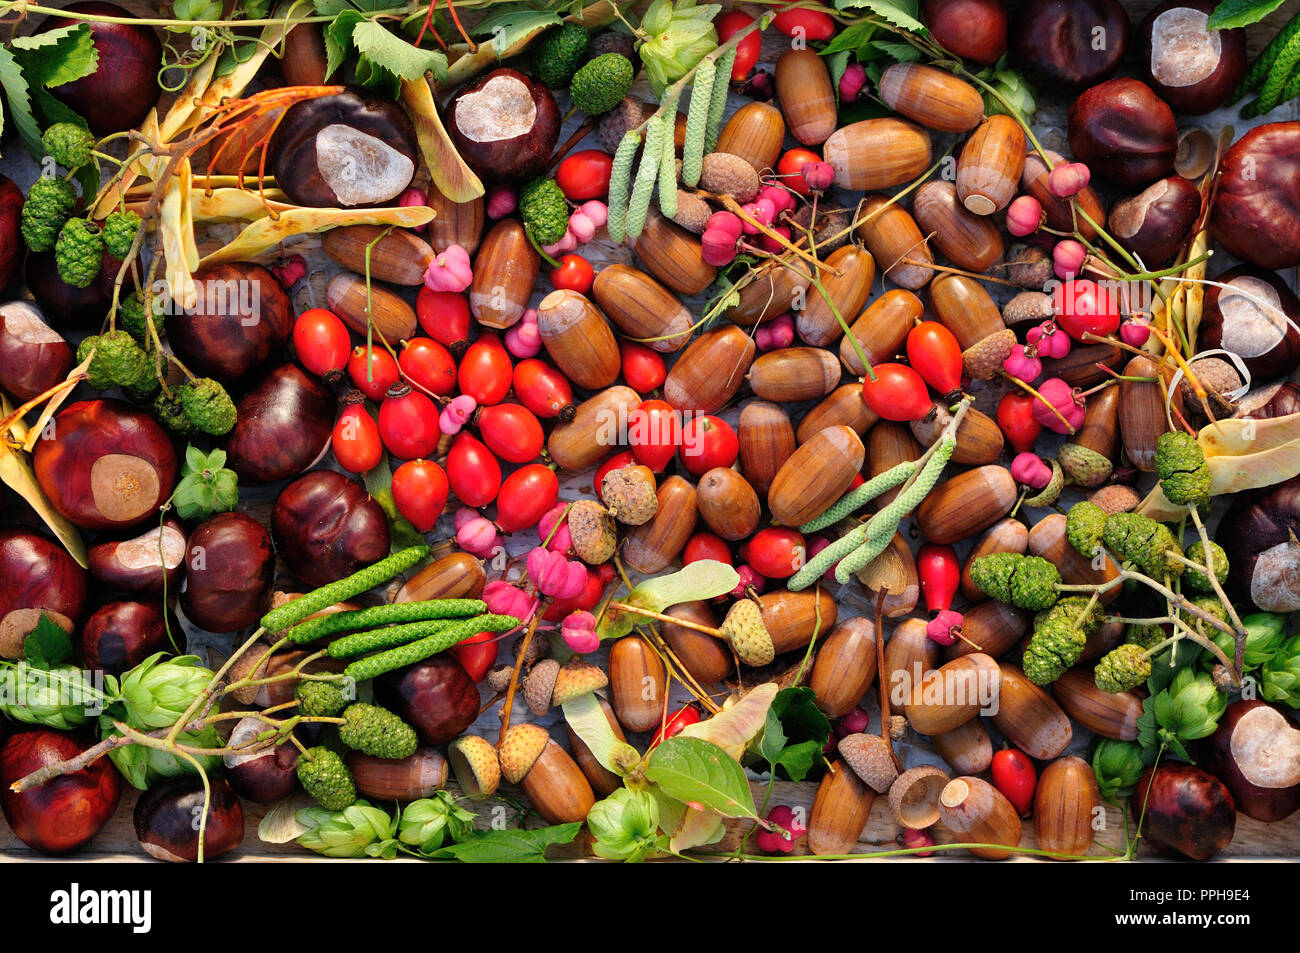 Autumn berries, seeds and fruits Stock Photo